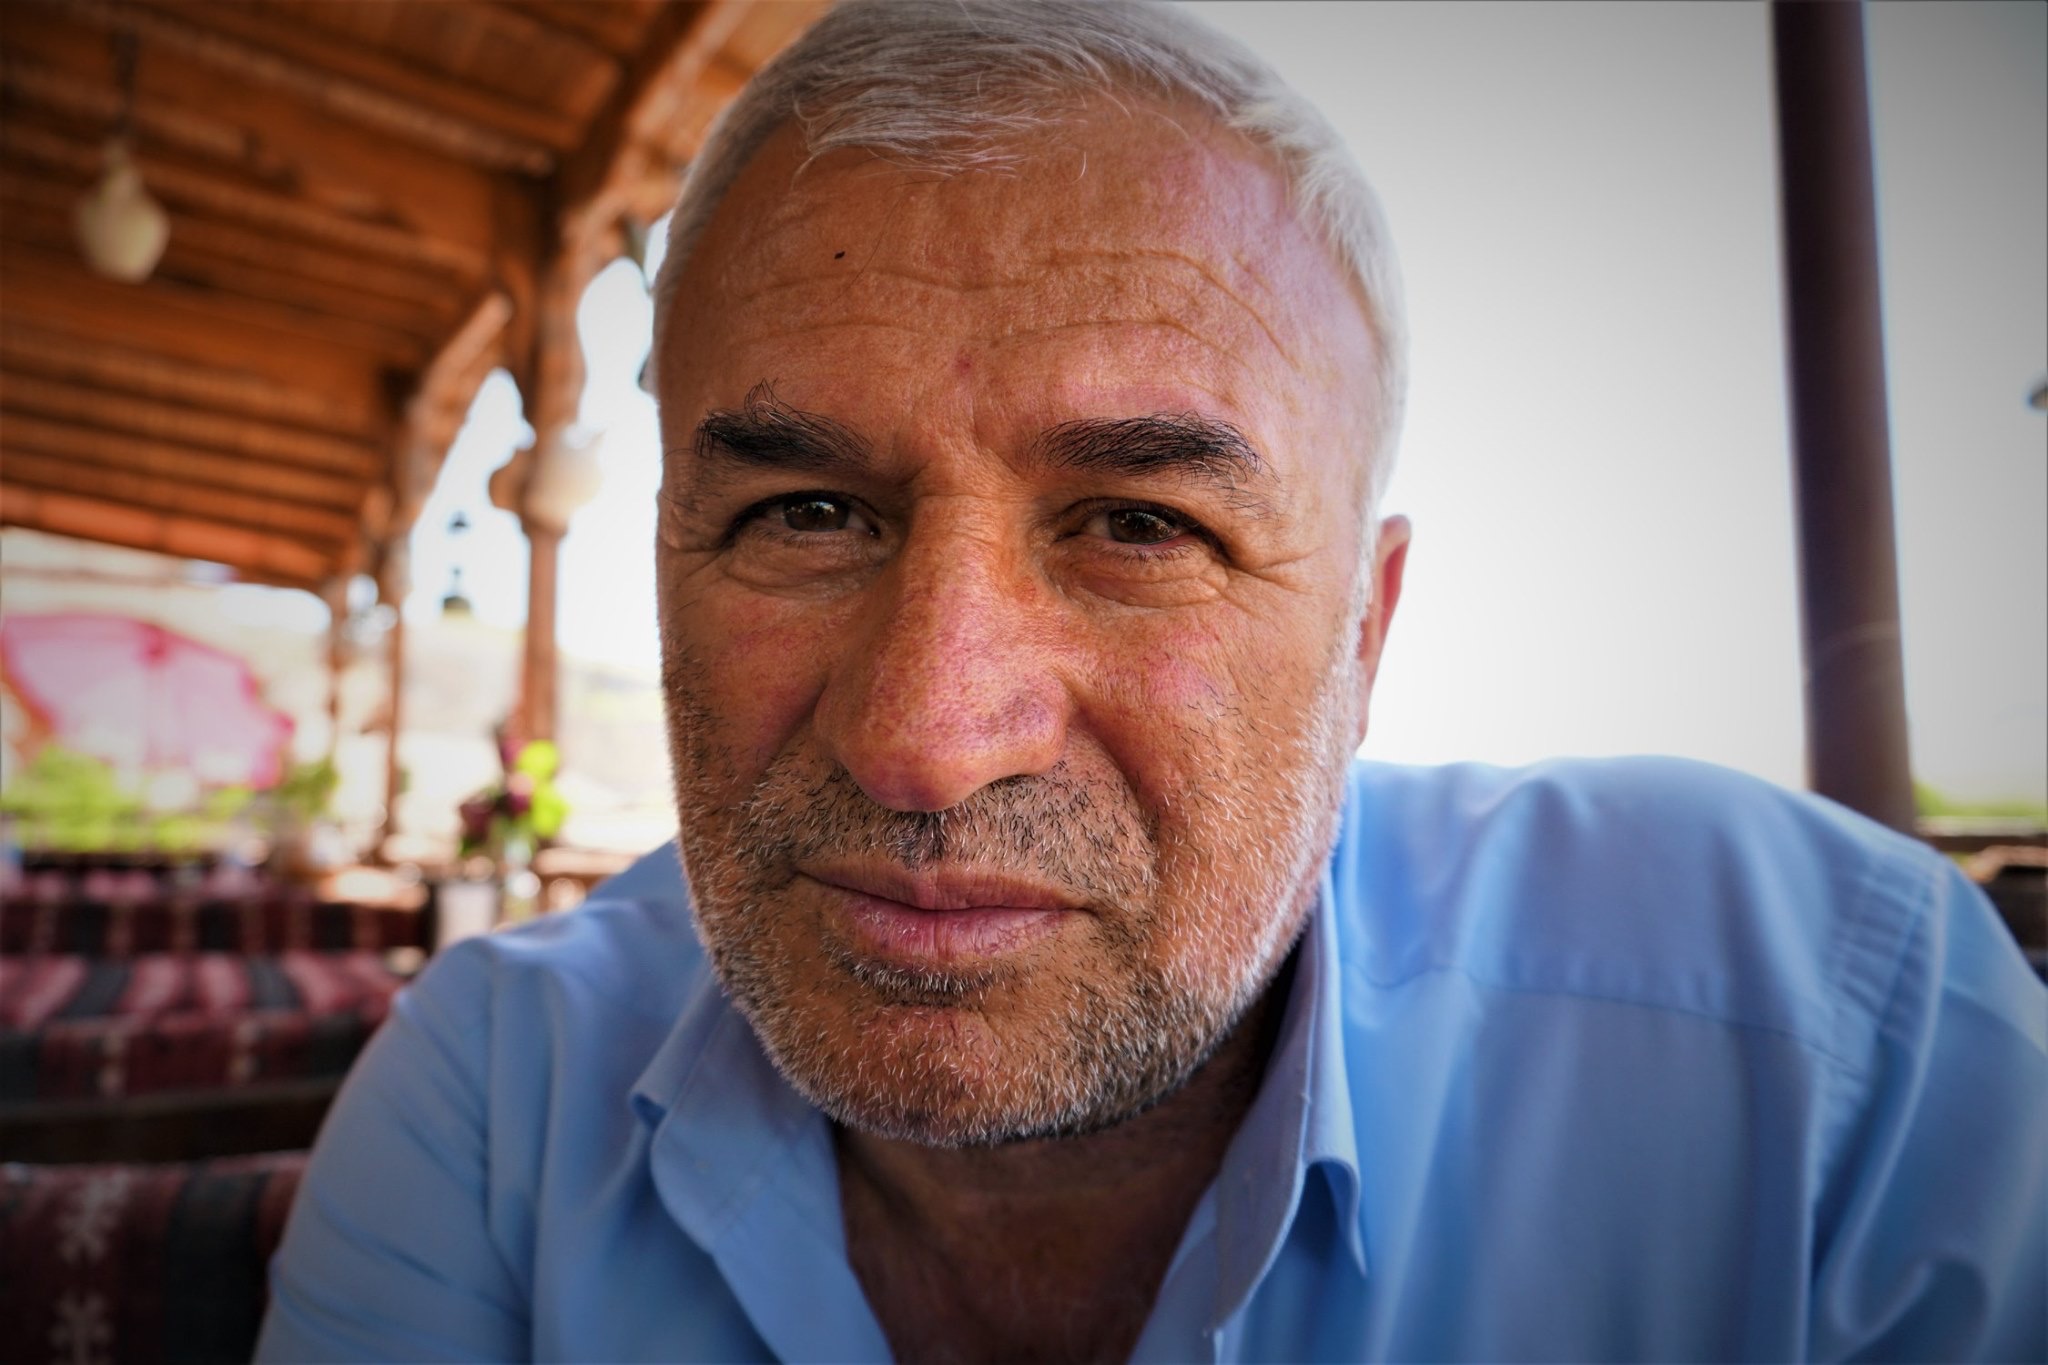 Ahmet Akdeniz used to defend the dam project as a way out of poverty and neglect for Hasankeyf residents (MEE/Nimet Kirac)